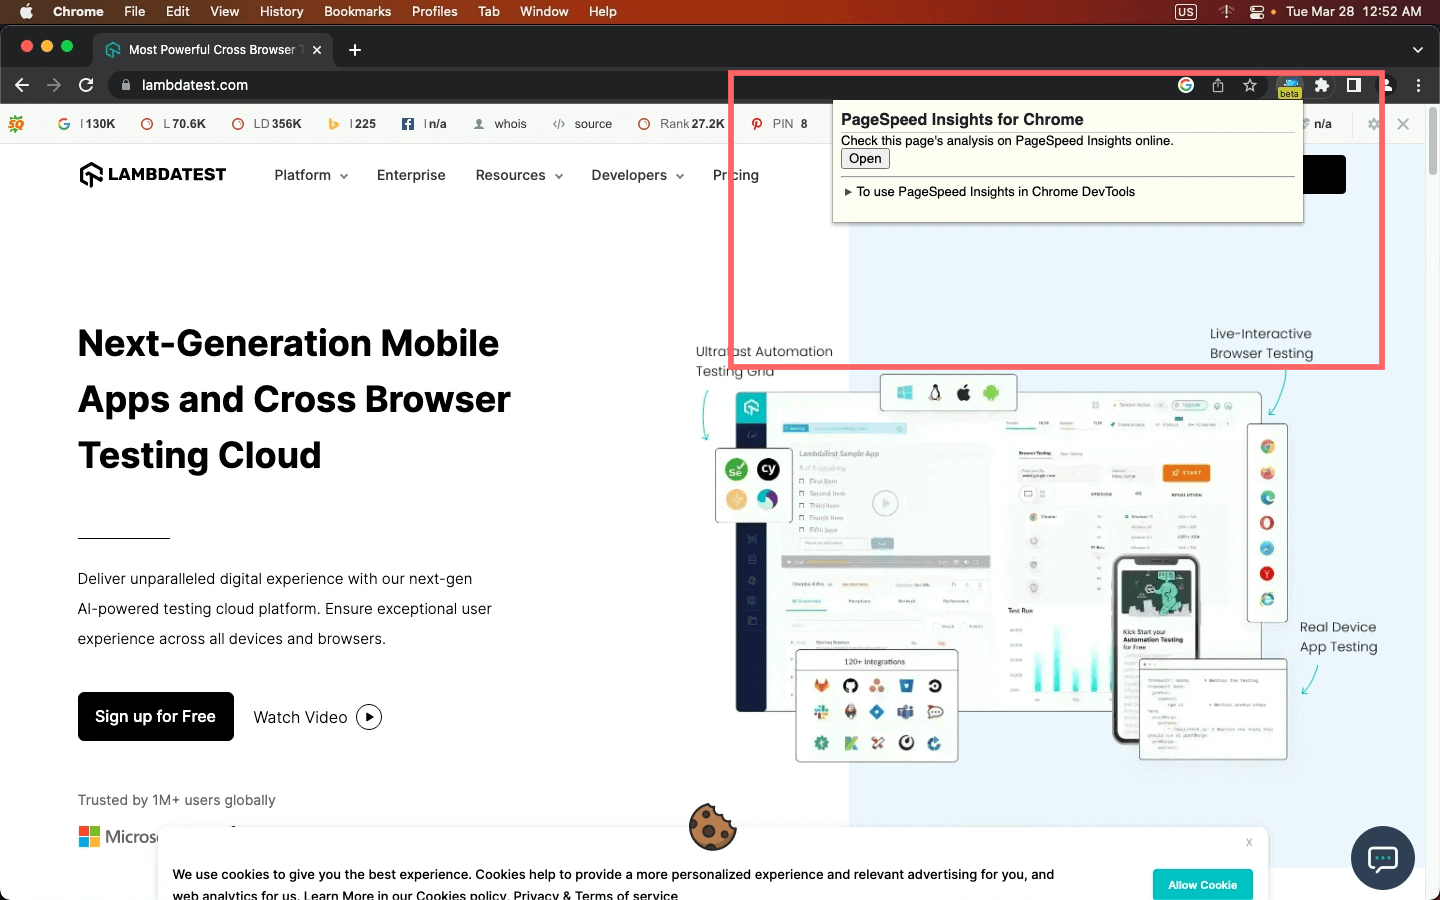 Two browser extensions for a better Steam experience